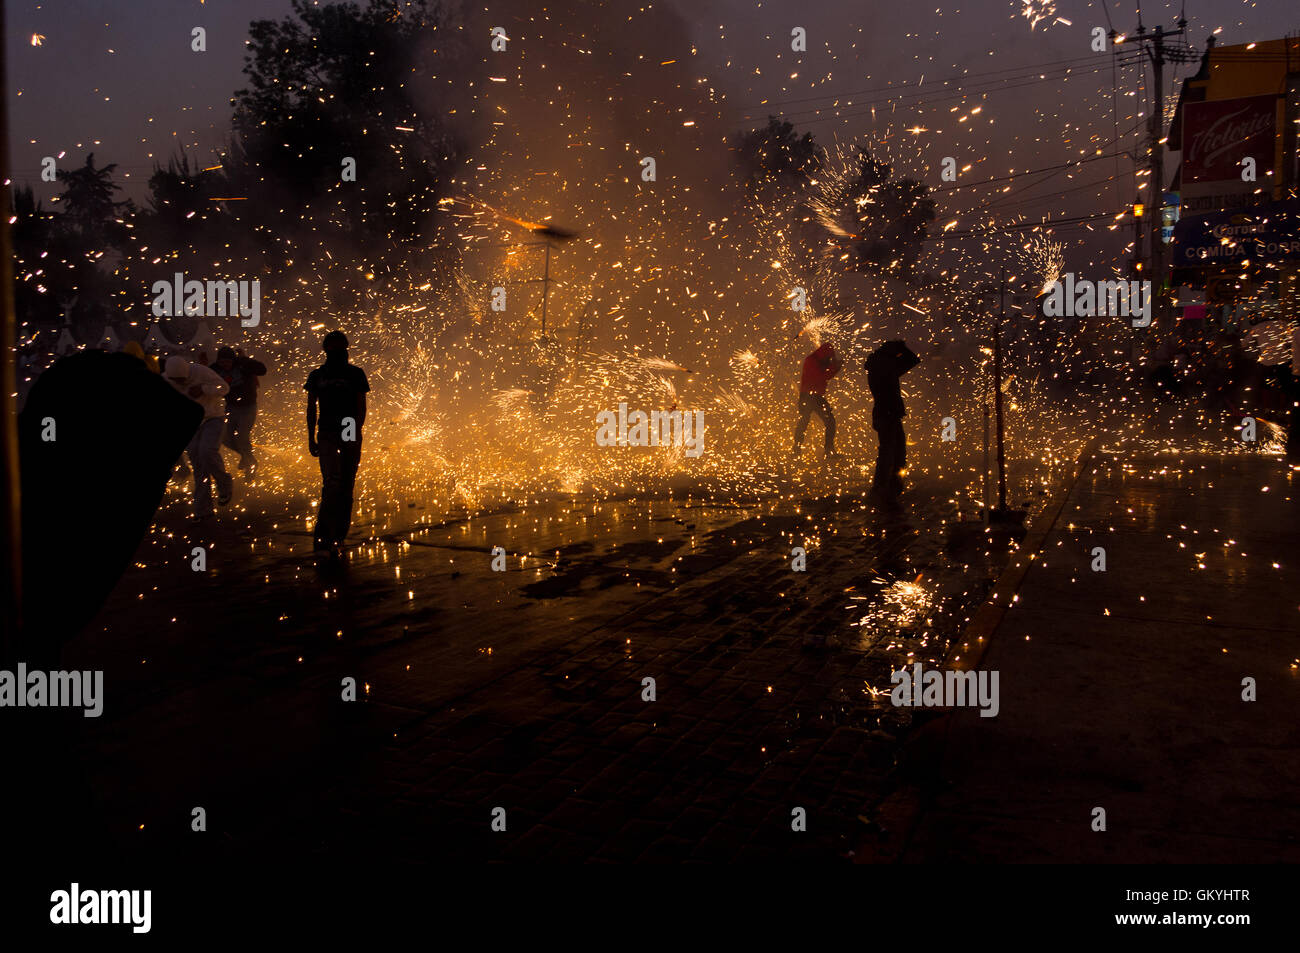 Burning (quema) of pyrotechnic bulls (toritos) during the National Pyrotechnic Festival in Tultepec, Mexico Stock Photo